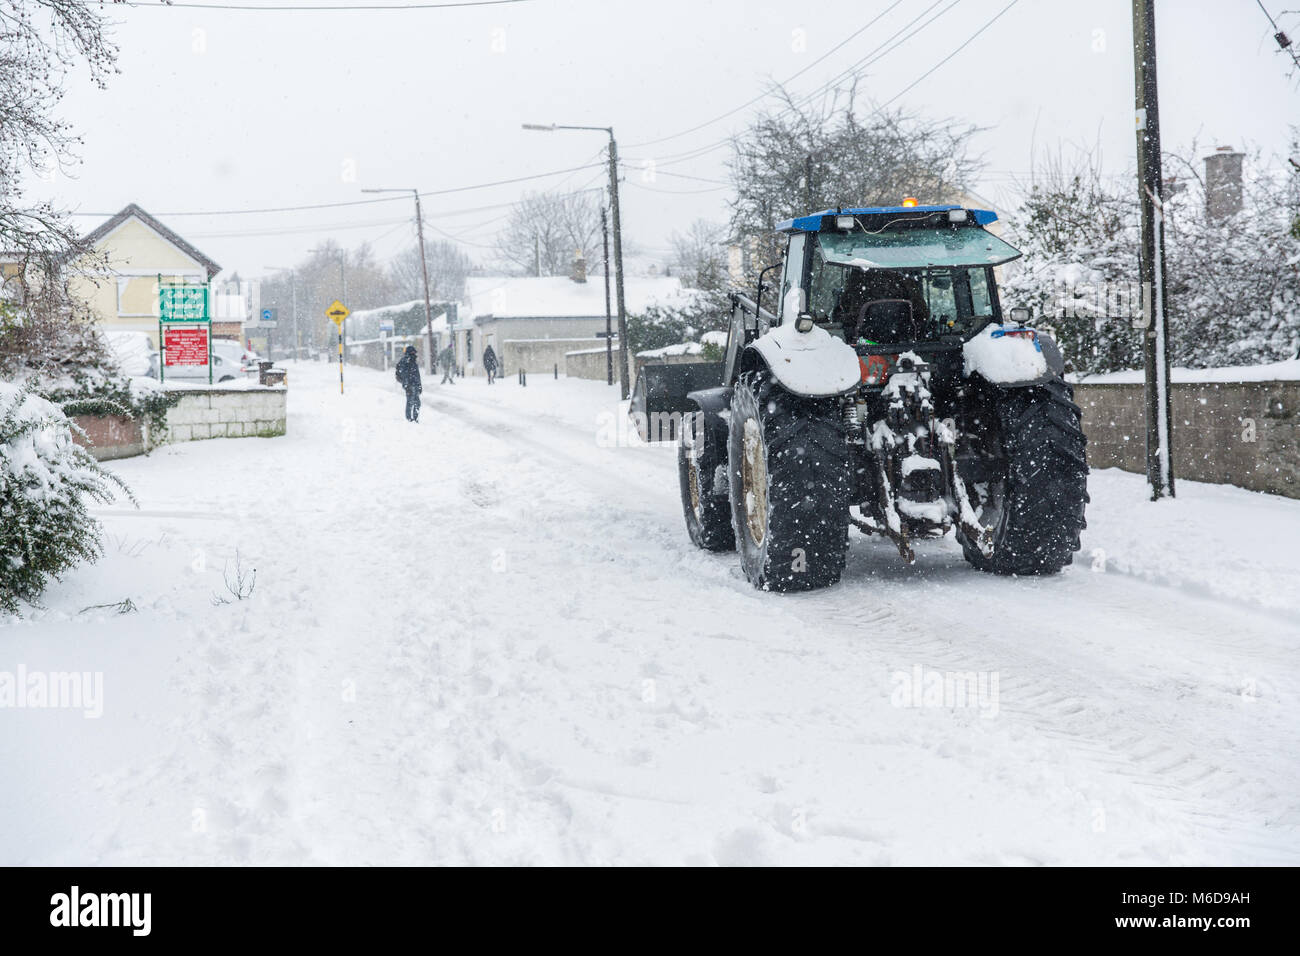 Celbridge, Kildare, Ireland. 02 Mar 2018: Tractor with front loader driving through covered in snow Celbridge. Local farmers are being mobilized to help clear the roads as local councils struggle to cope with the amount of snow fall brought by cold wave 'beat from the east' followed by storm Emma. Stock Photo